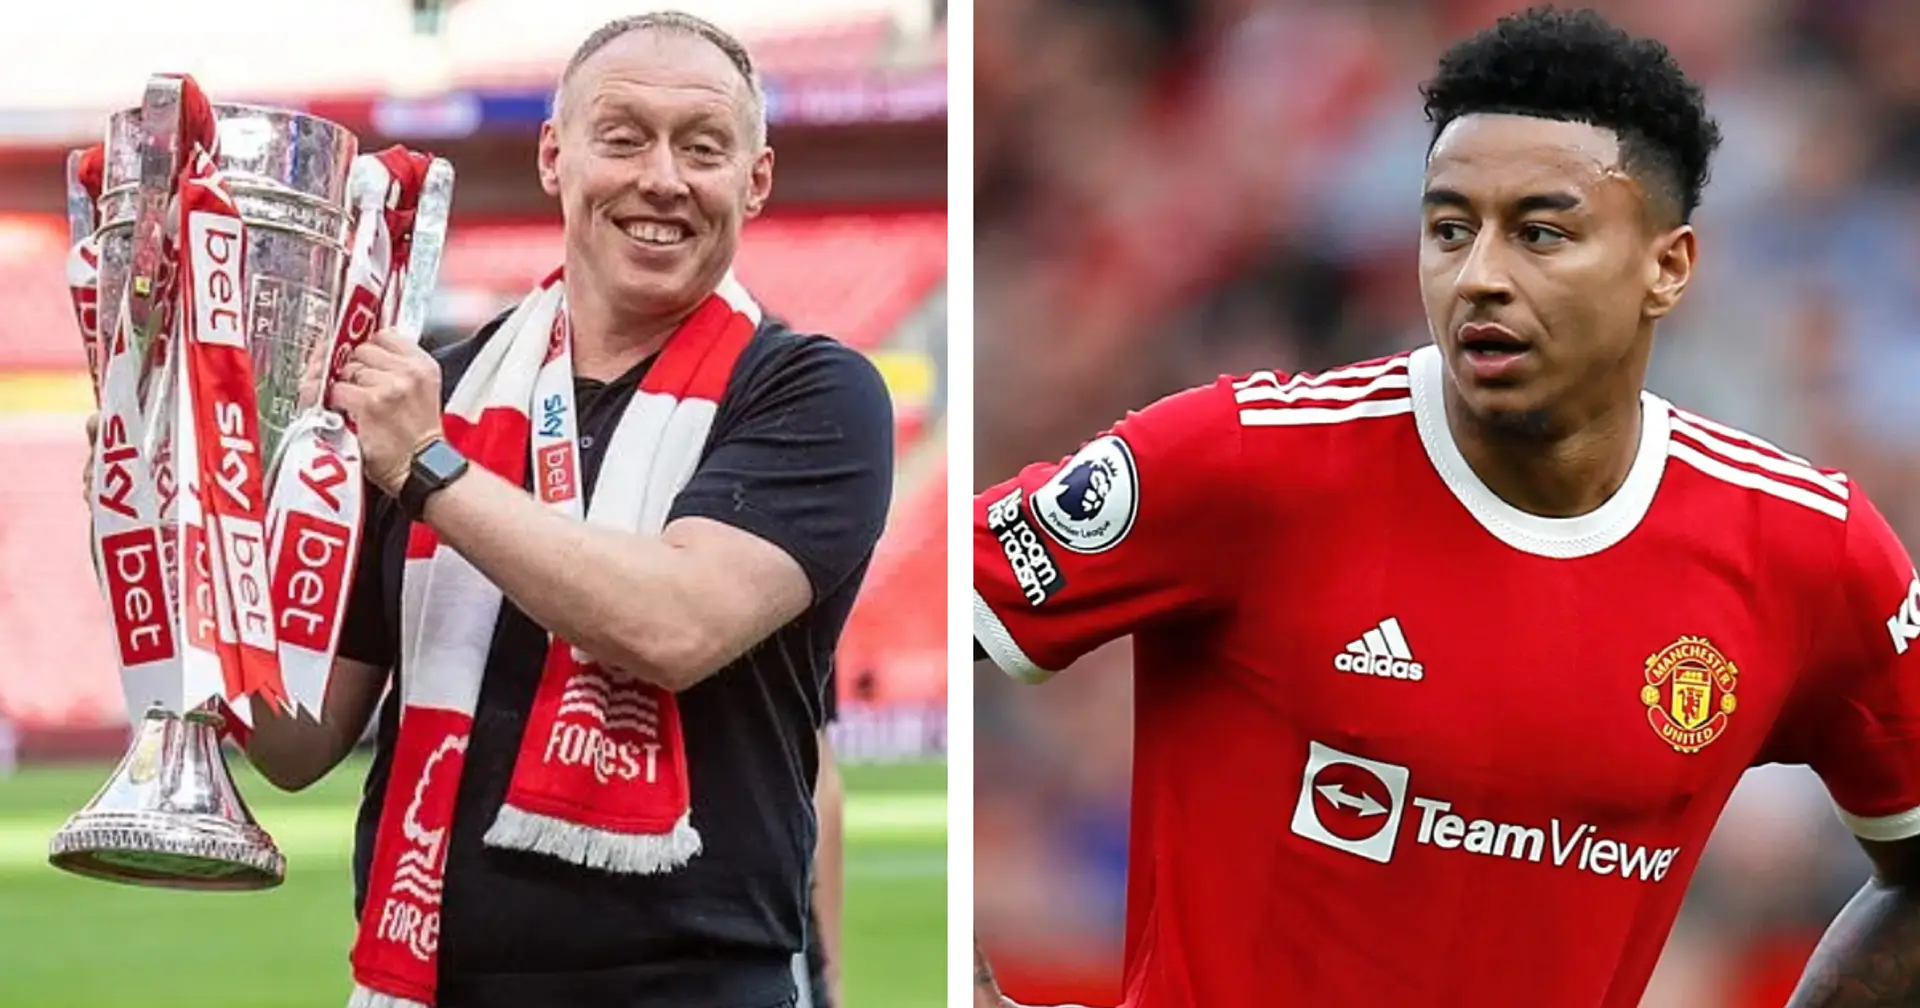 Nottingham Forest 'close to agreeing' deal for Jesse Lingard (reliability: 4 stars)